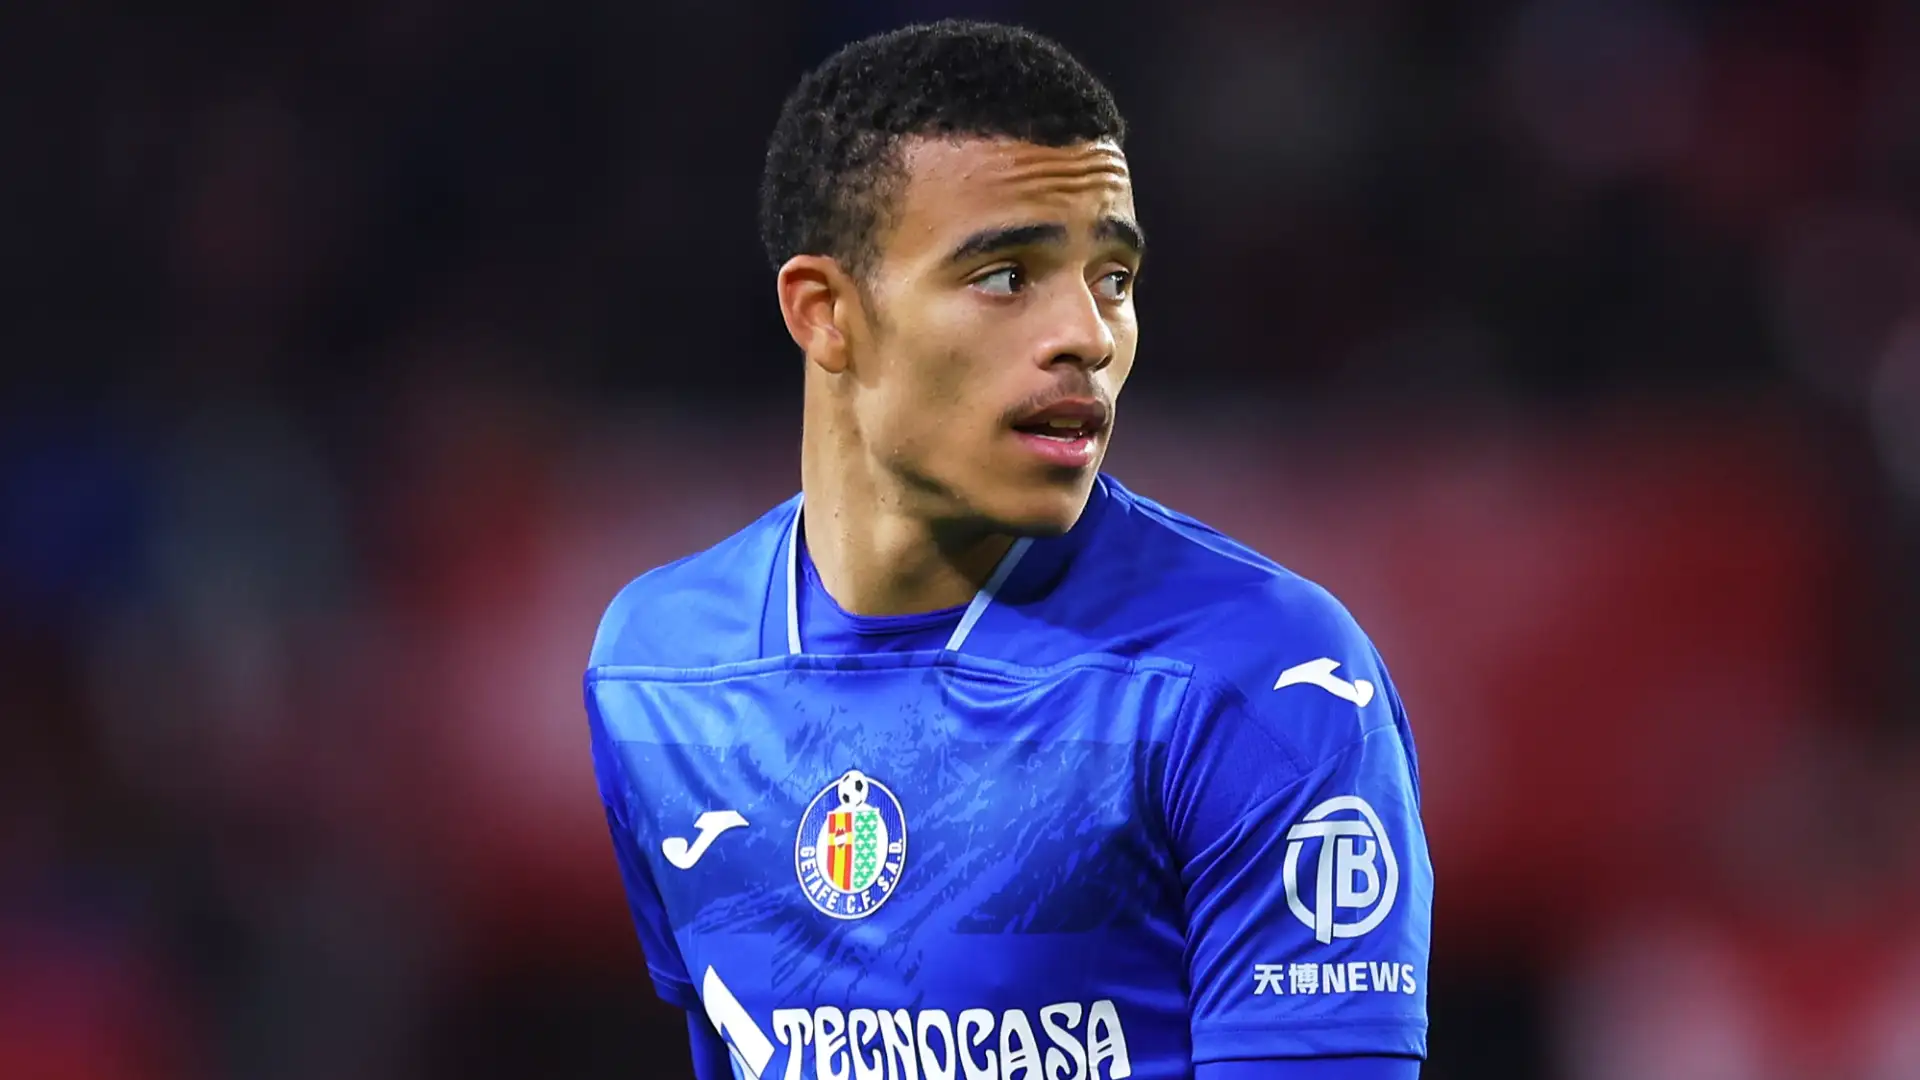 Ambulance called onto pitch in Mason Greenwood’s last game for Getafe as Man Utd loanee's team-mate 'loses consciousness for several minutes' after collision